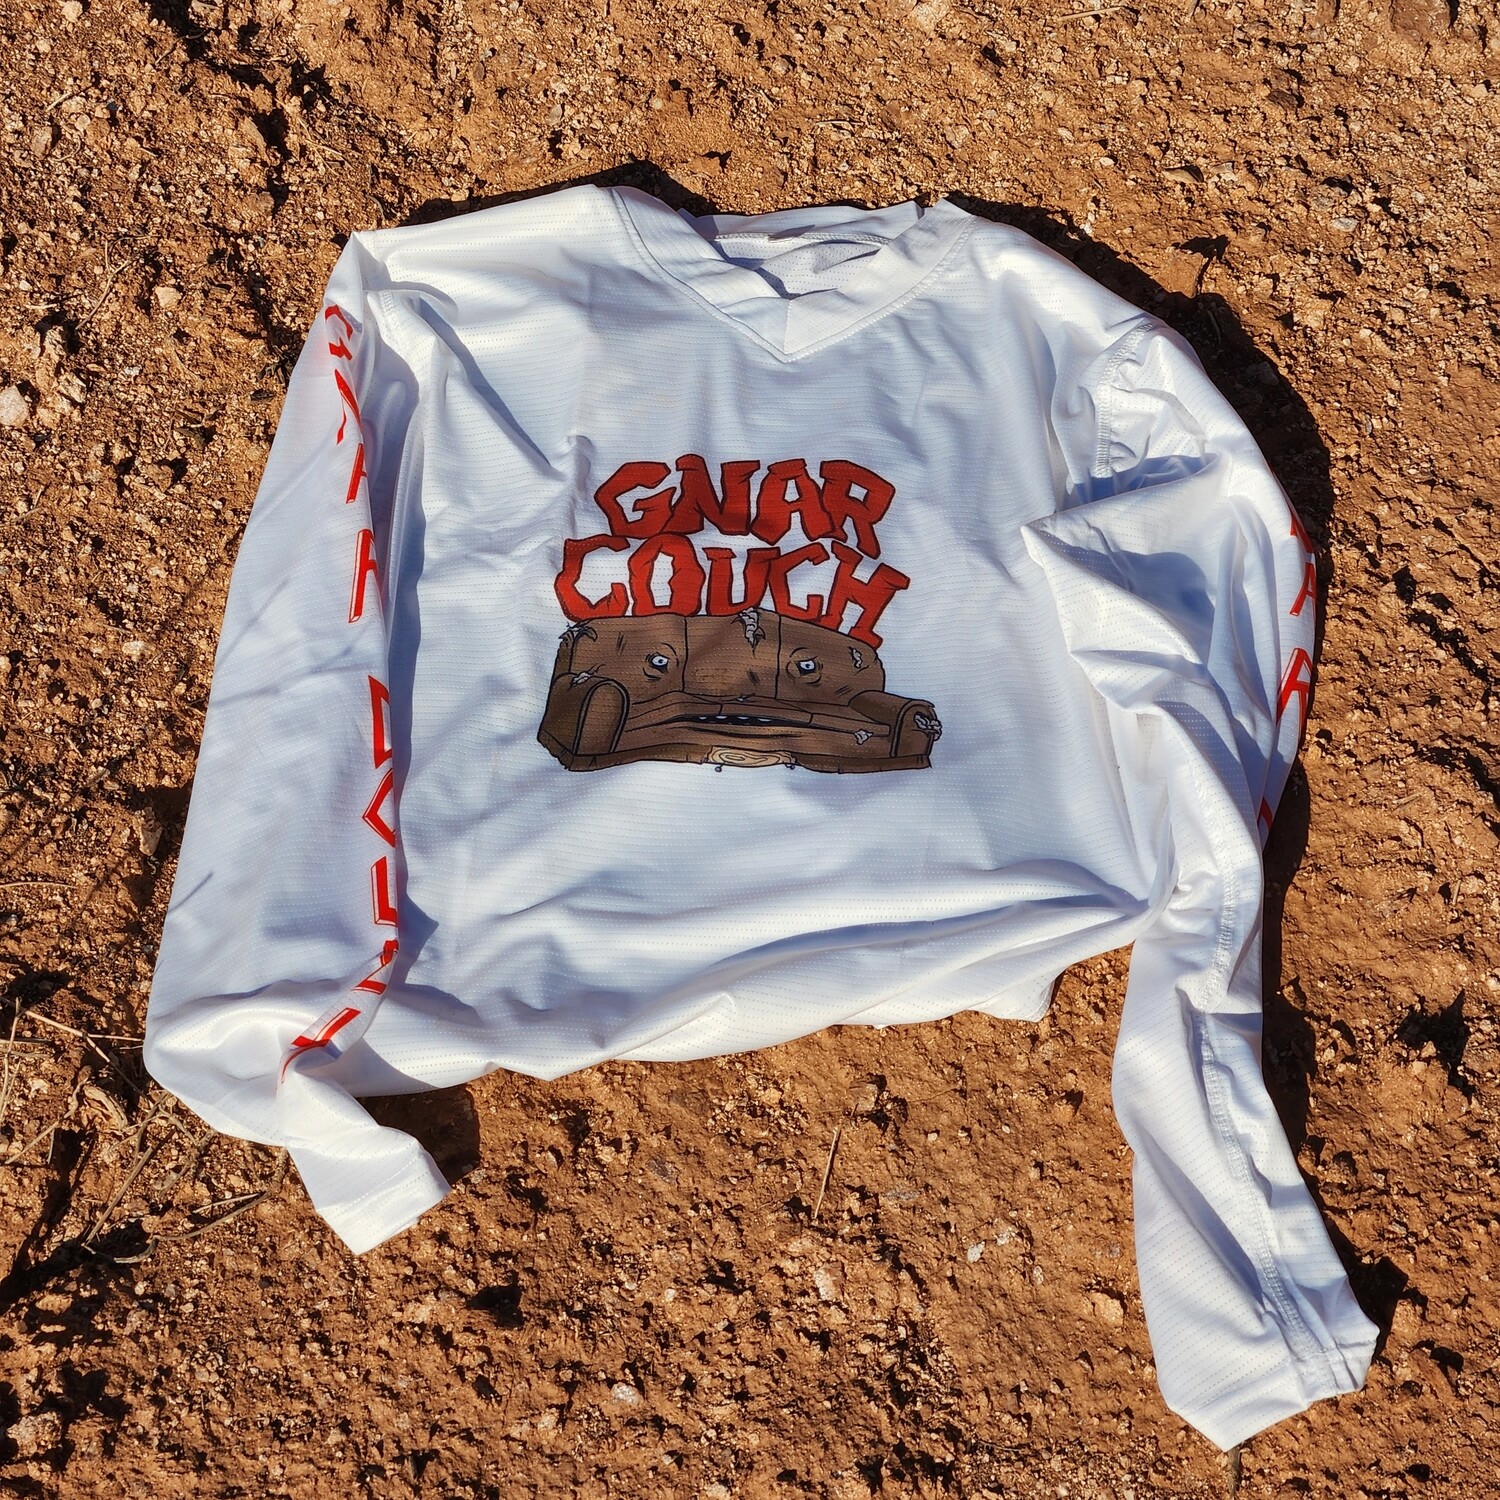 Gnar Couch White Jersey XL